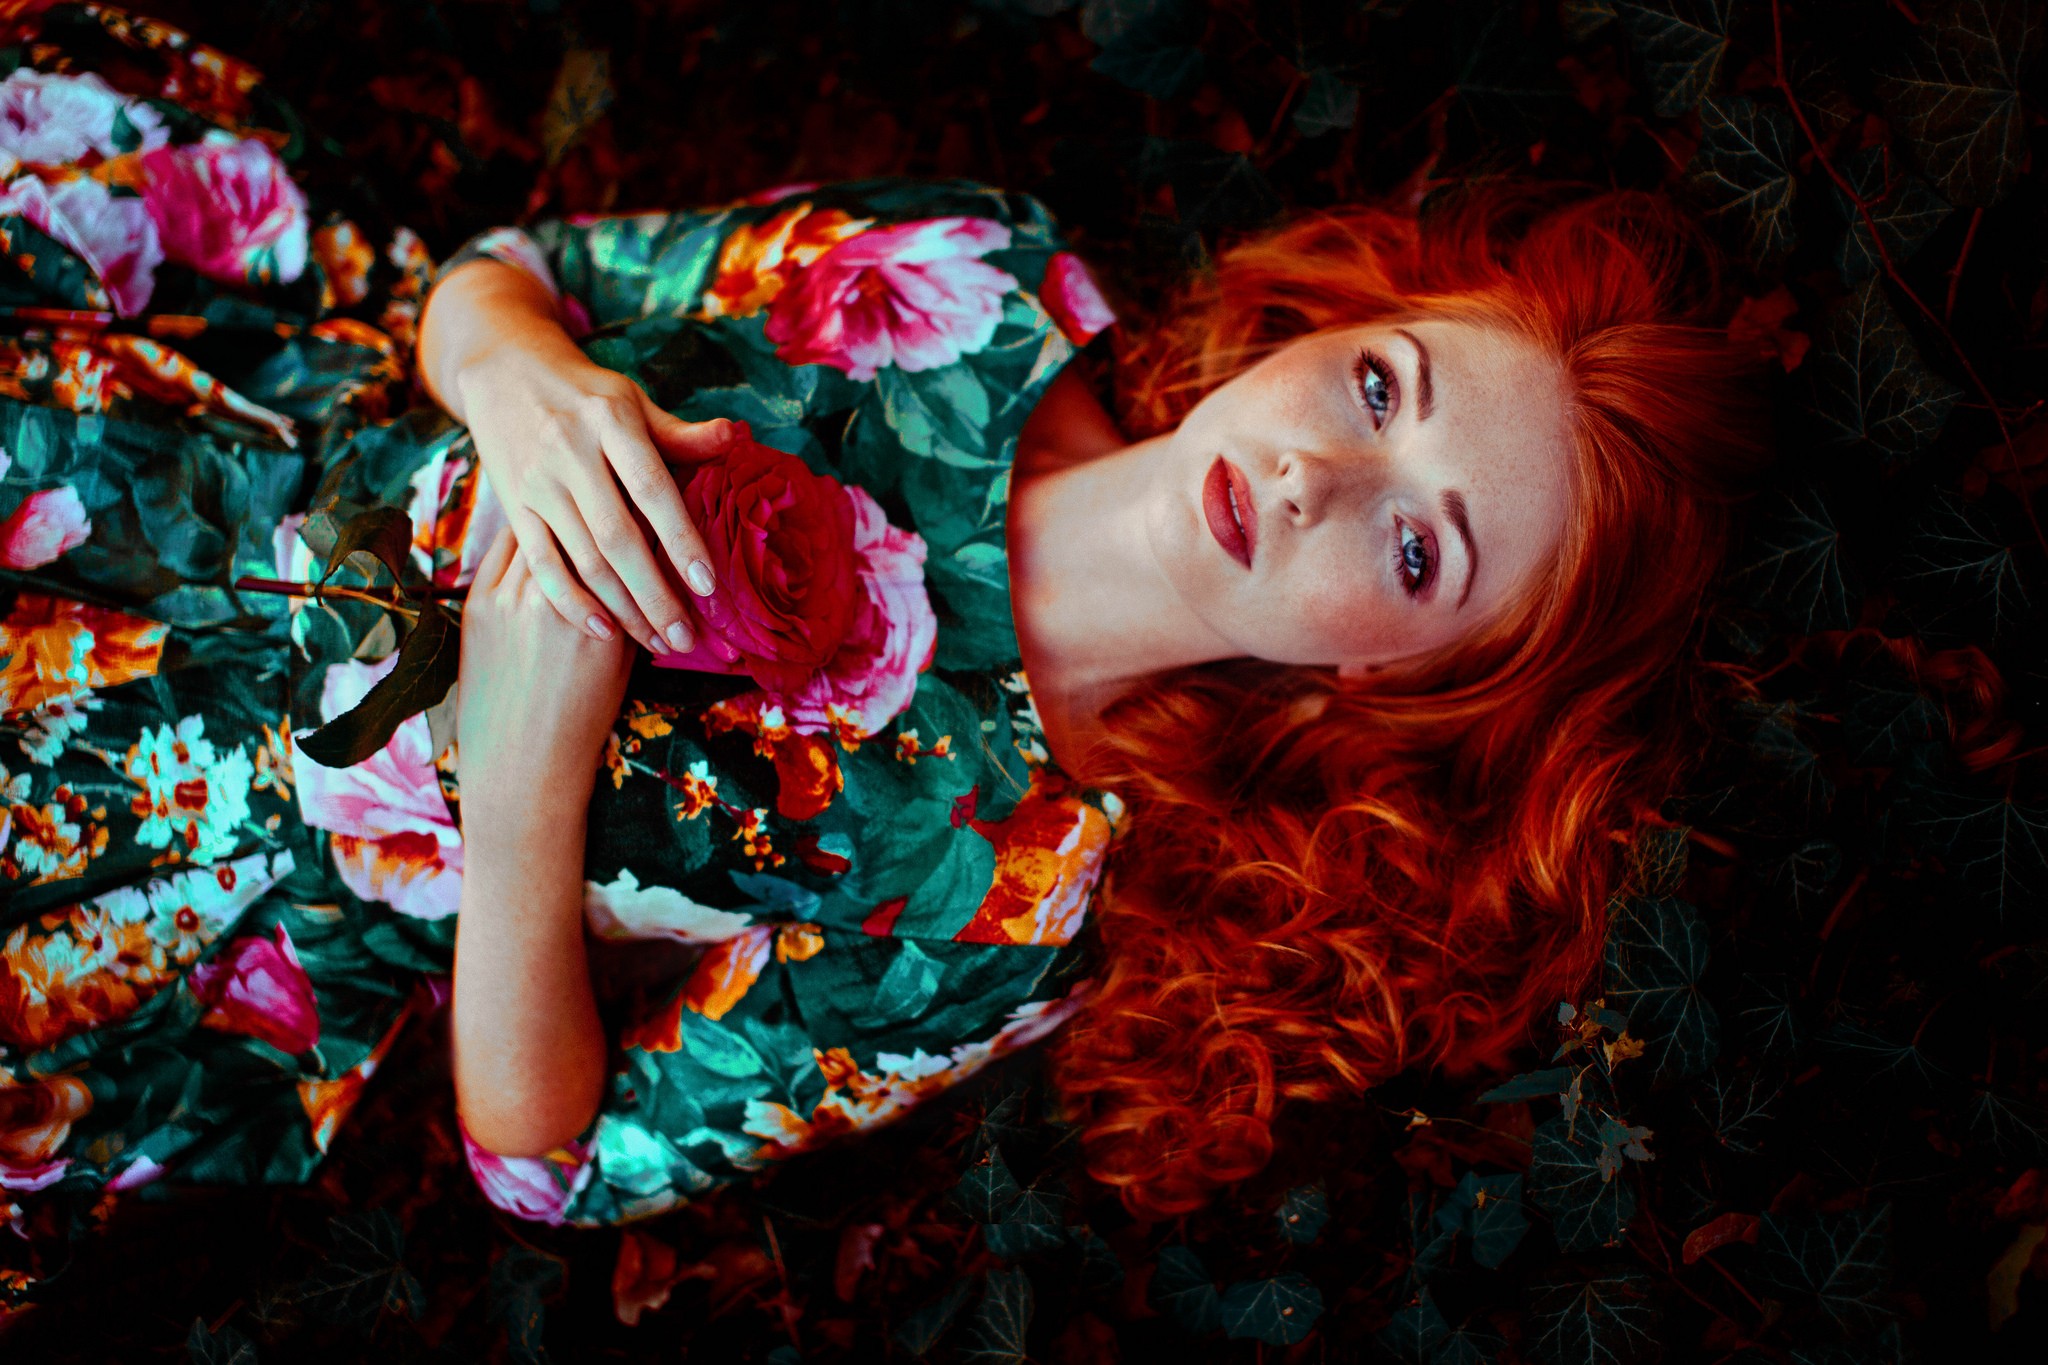 Women Redhead Blue Eyes Red Lipstick Flowers Rose Dress Looking At Viewer Hands On Chest 2048x1365